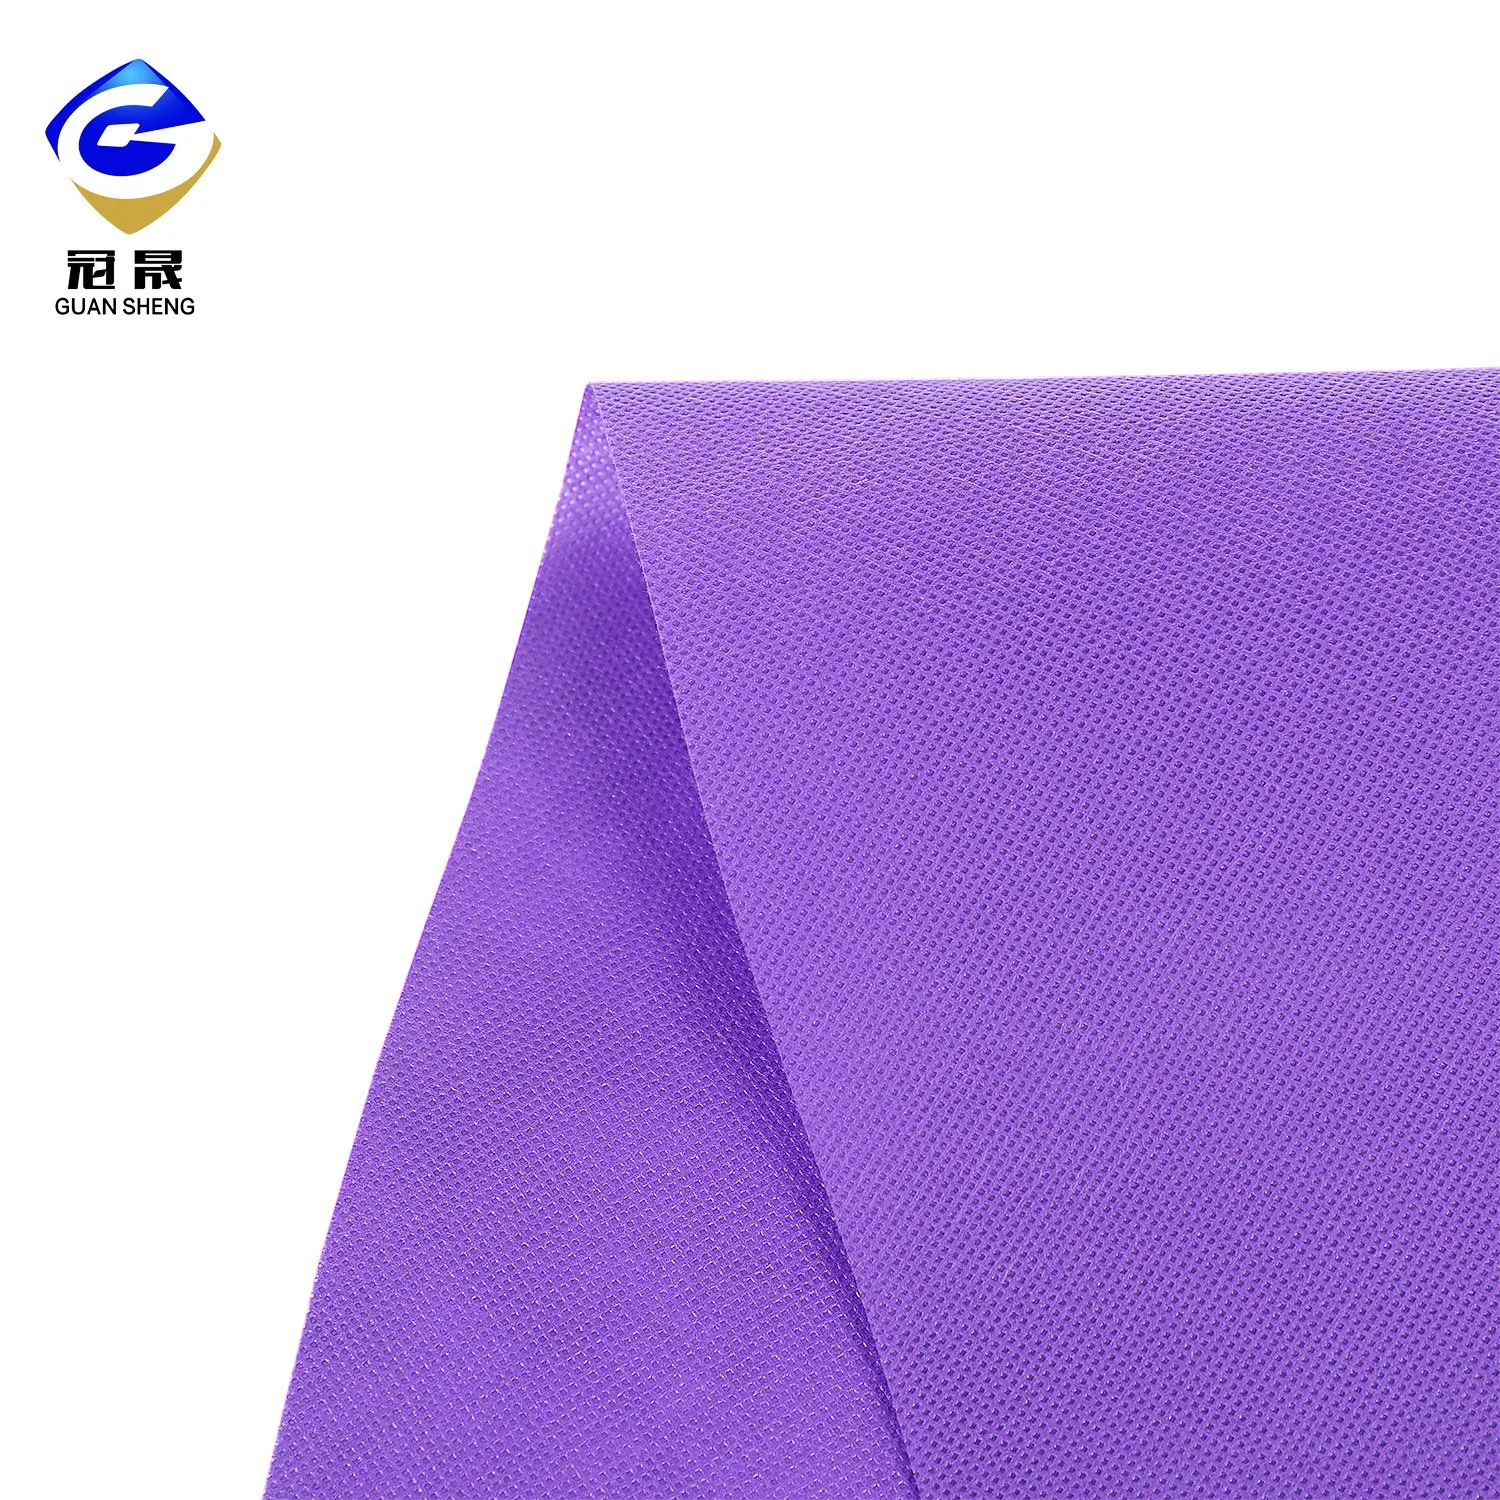 Blue SS/SSS PP Spunbond Non Woven for Face Mask 100% Polypropylene 3 Ply Disposable Face Mask Raw Material Spunbond Non Woven Fabric